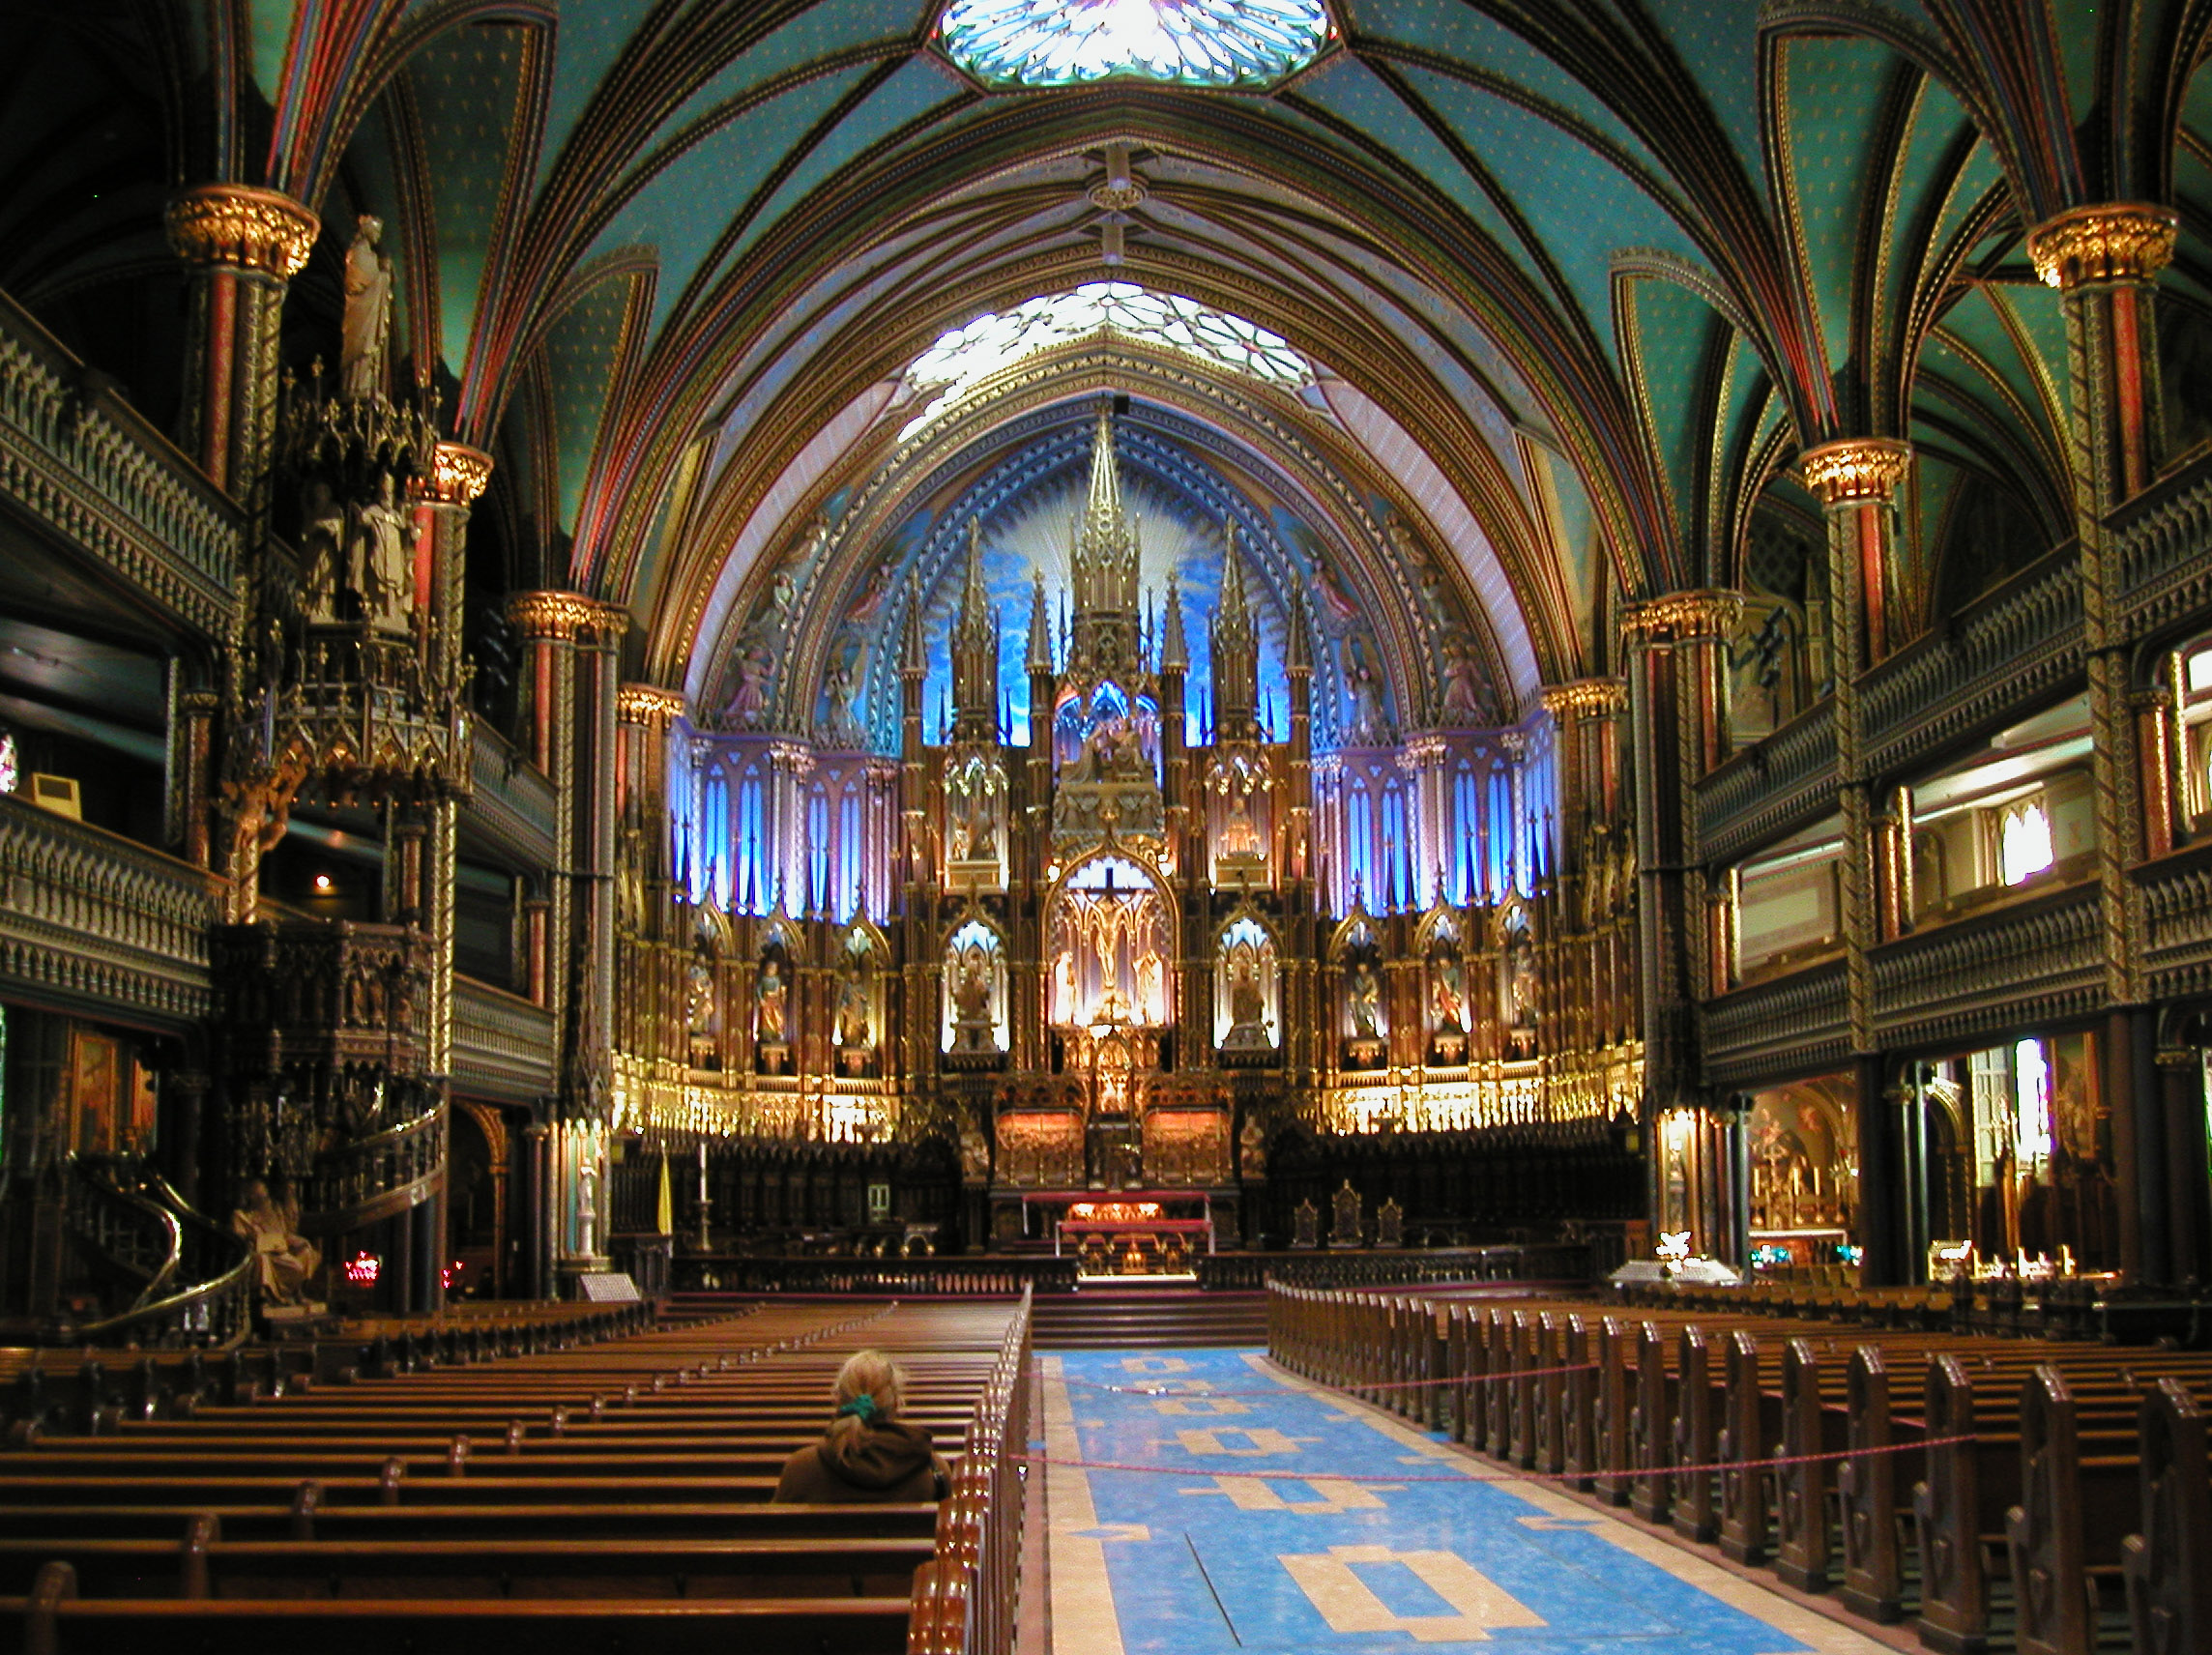 Notre Dame Basilica In Montreal Backgrounds, Compatible - PC, Mobile, Gadgets| 2288x1712 px